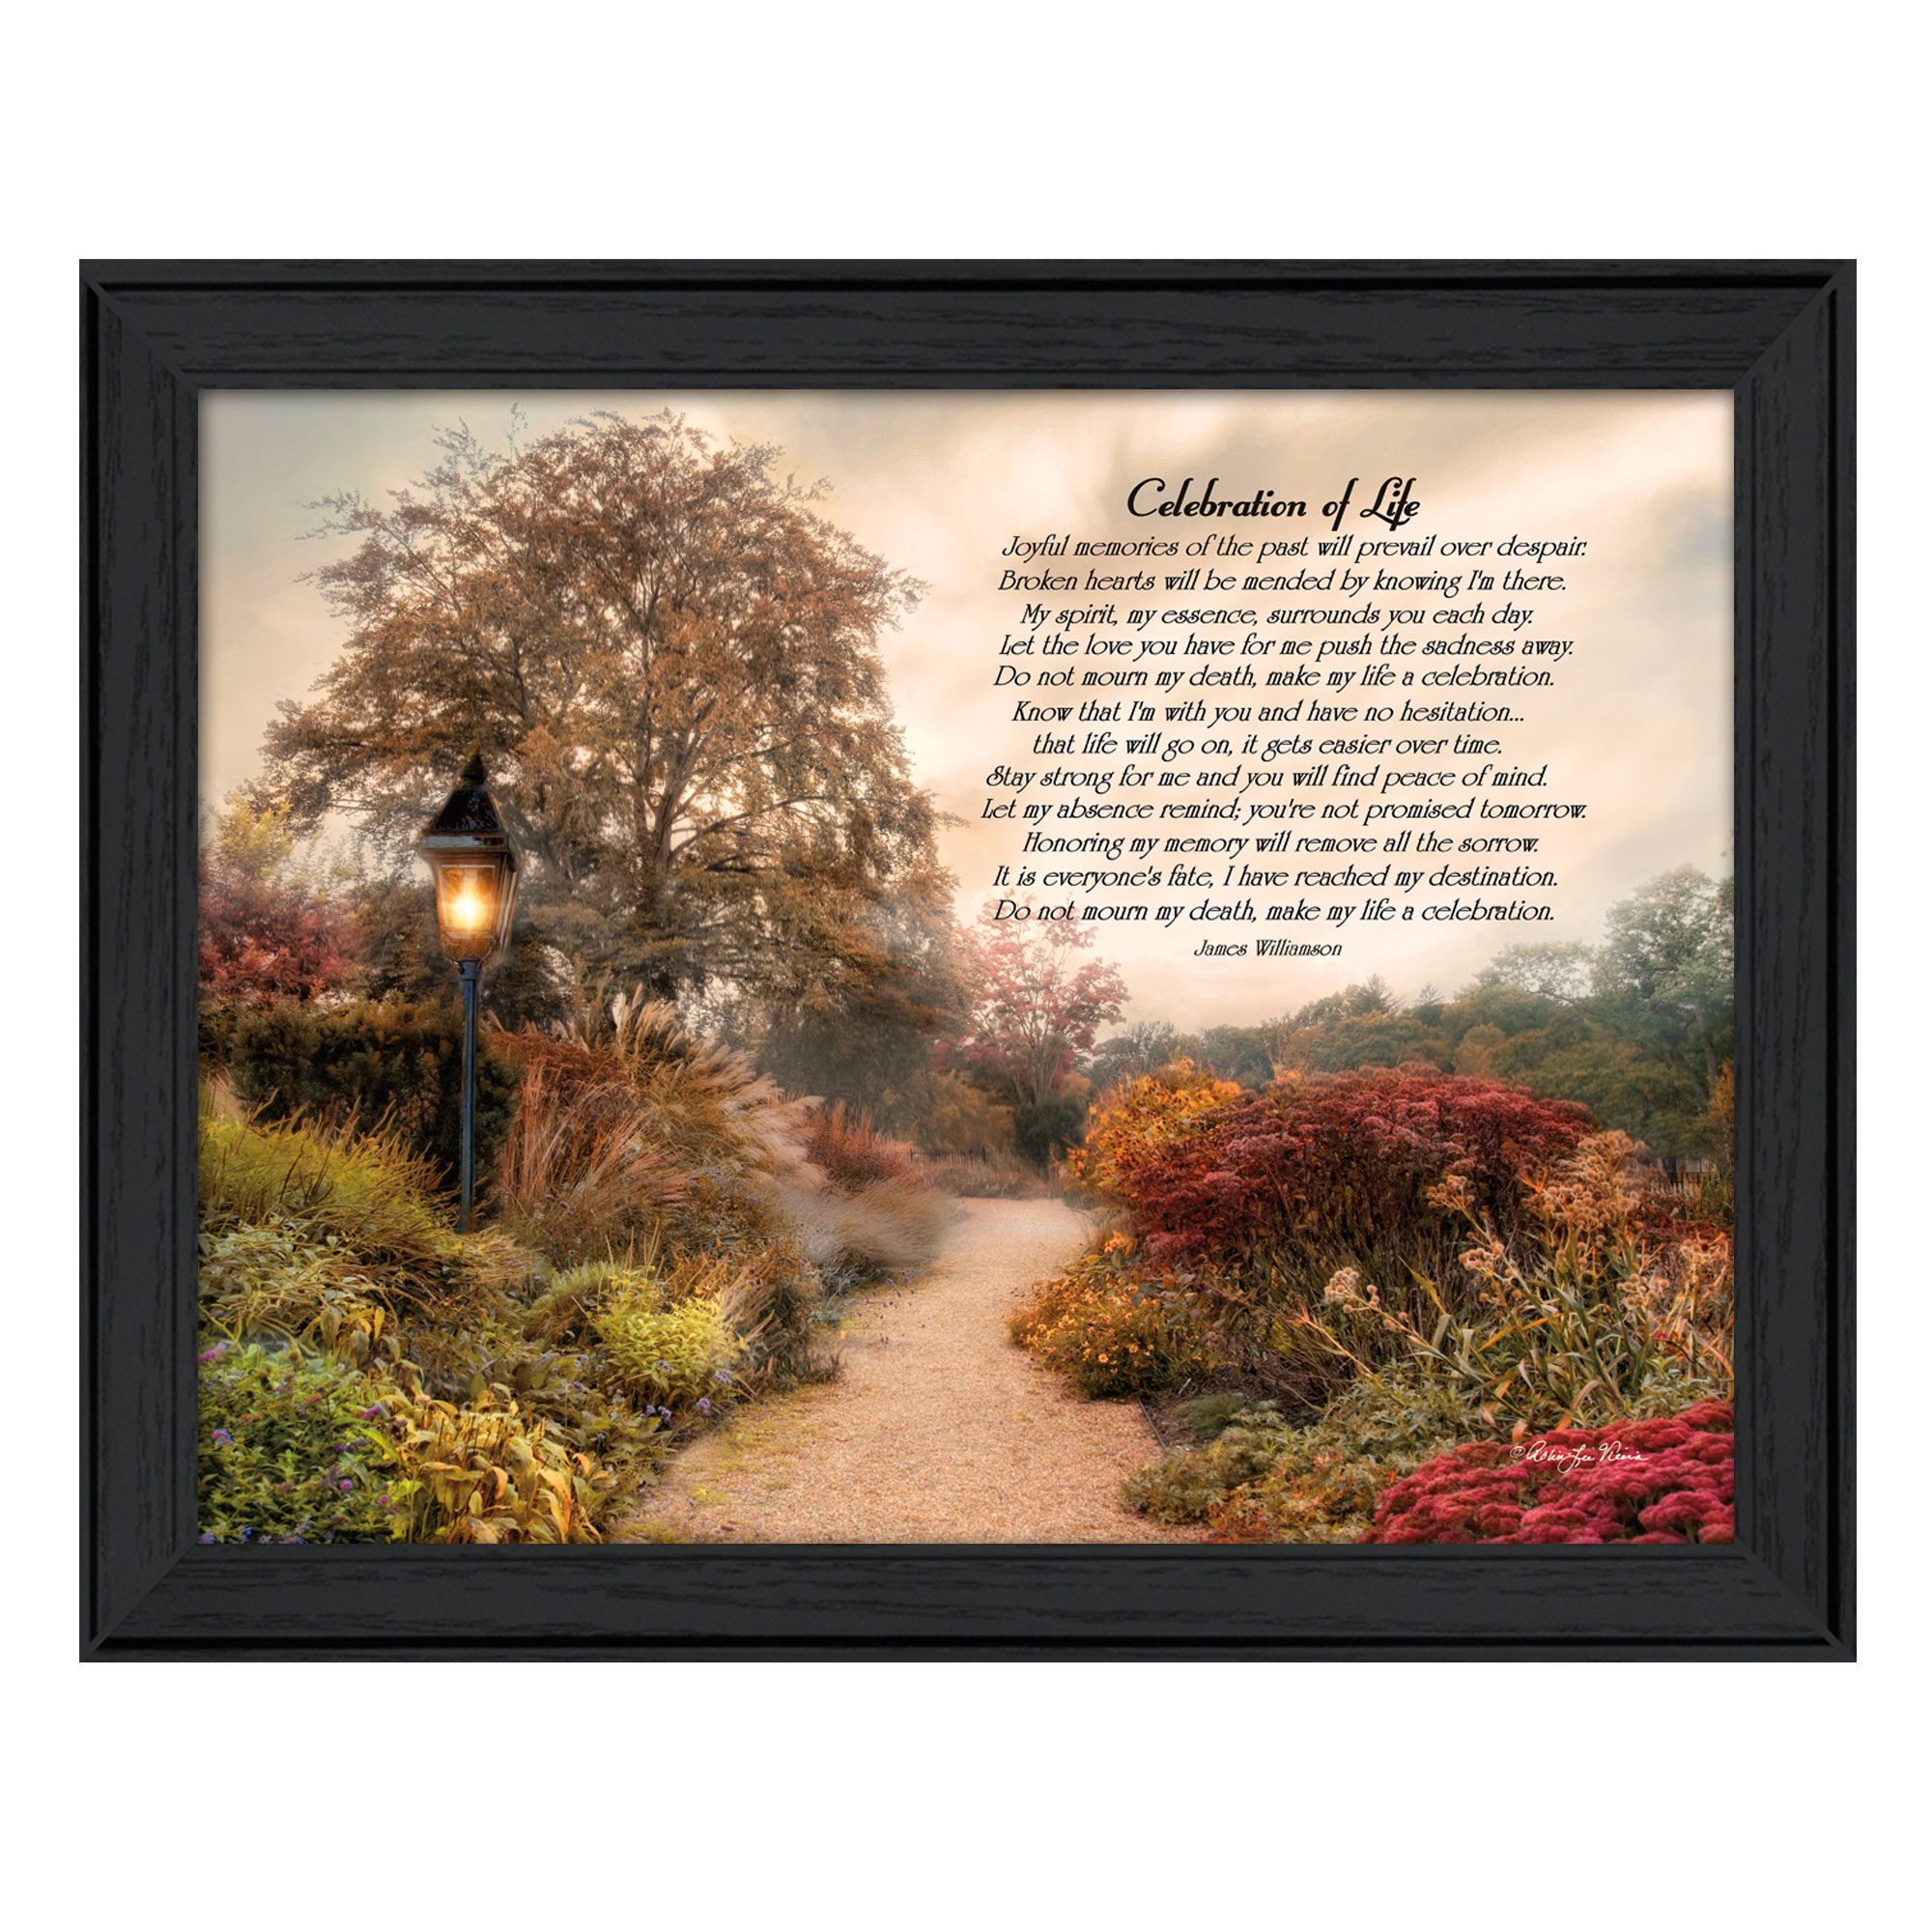 "Celebration of Life" By Robin-Lee Vieira, Printed Wall Art, Ready To Hang Framed Poster, Black Frame